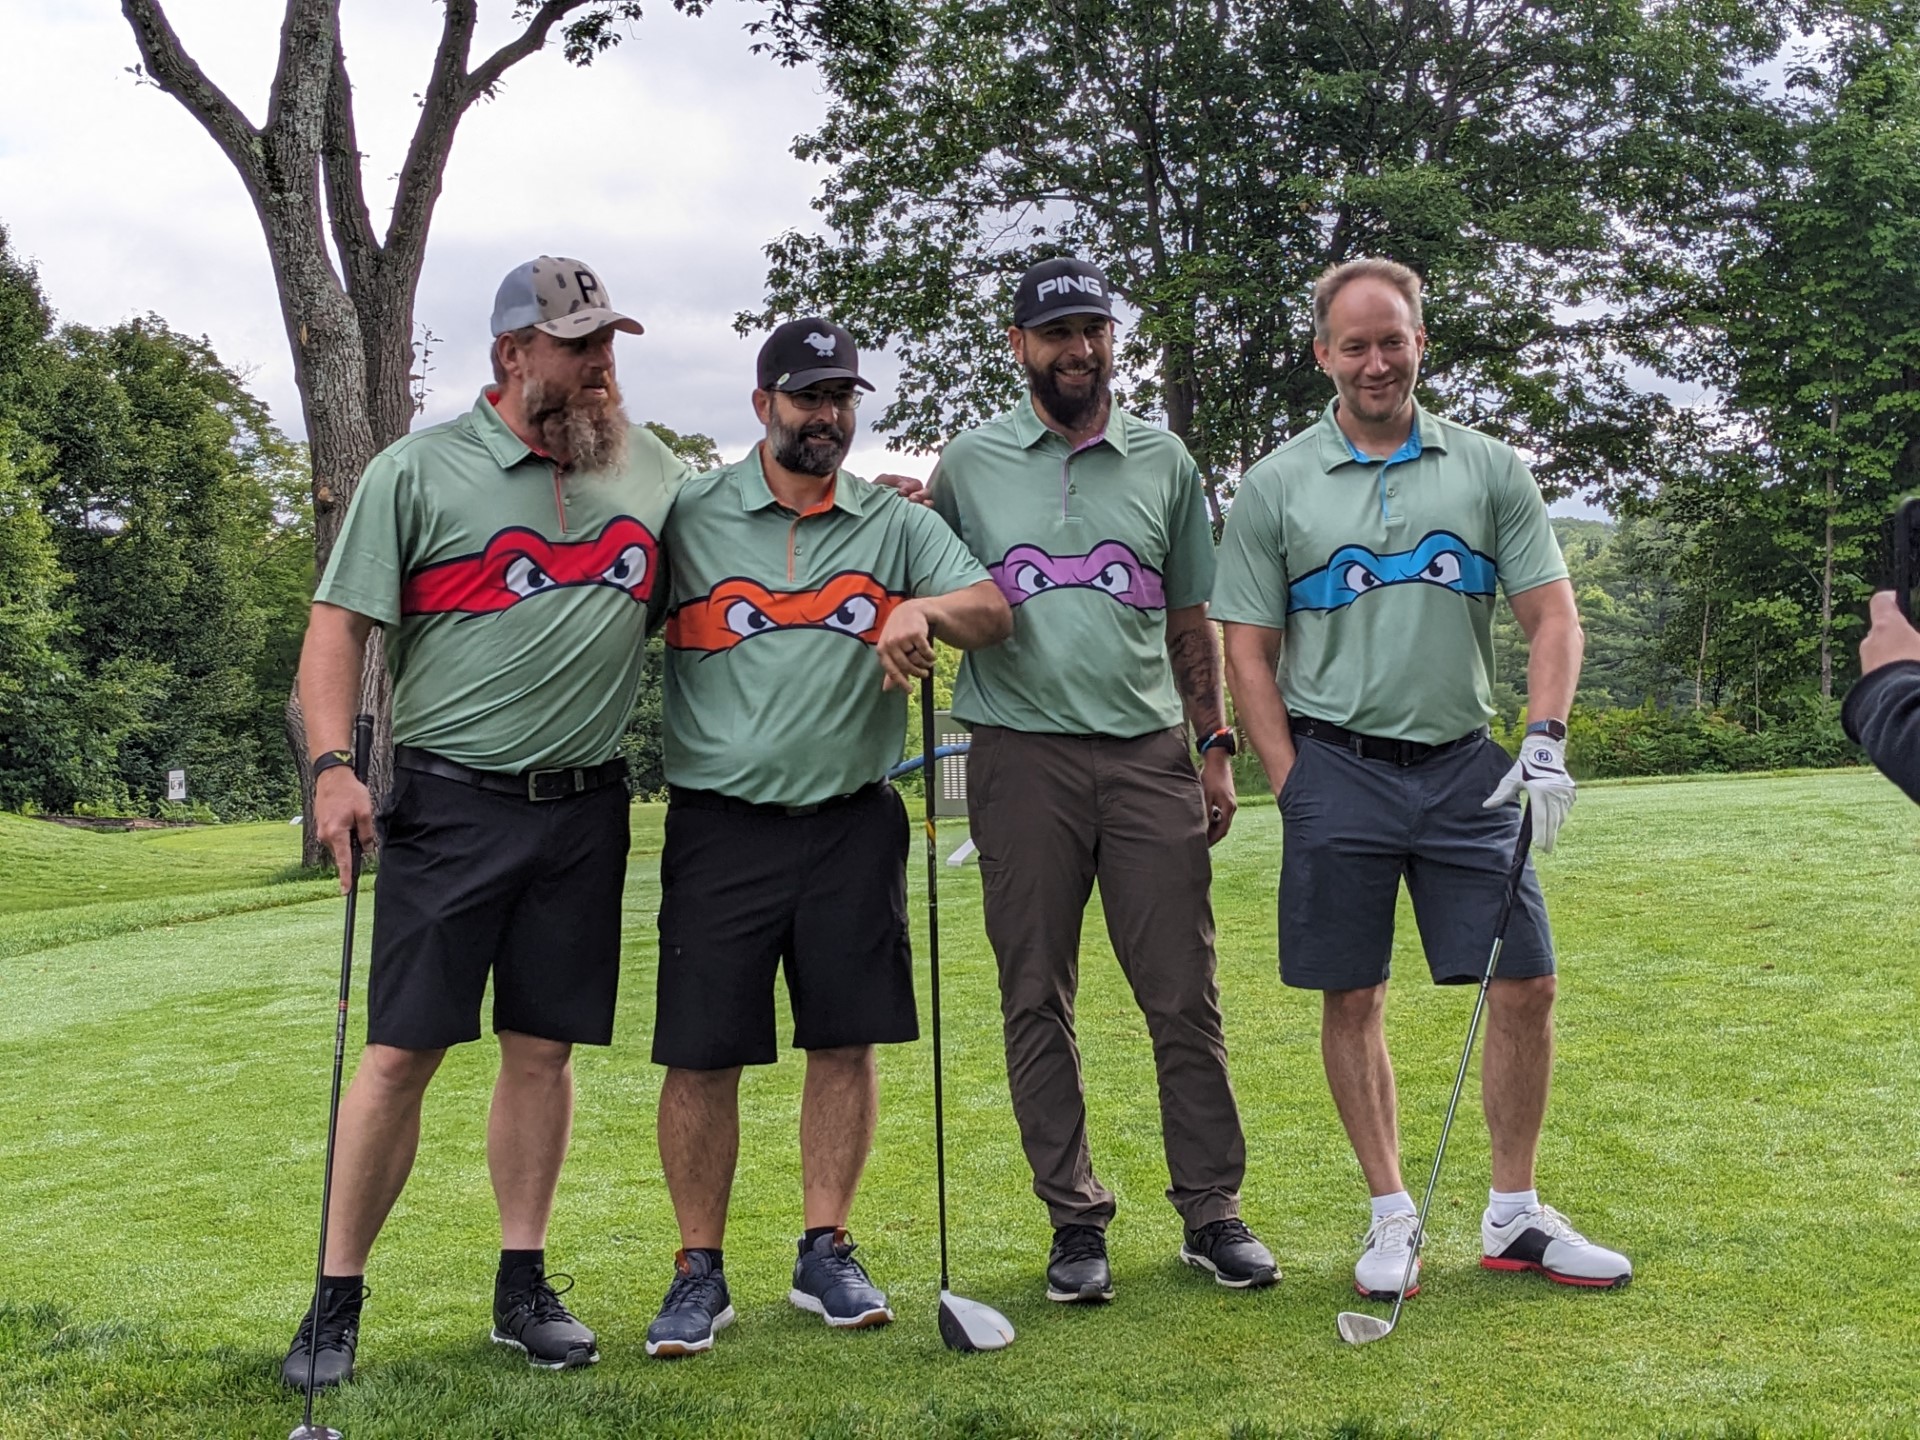 Four people standing side by side, outdoors. The individuals first and second from the left and the individual on the far right are holding golf clubs.